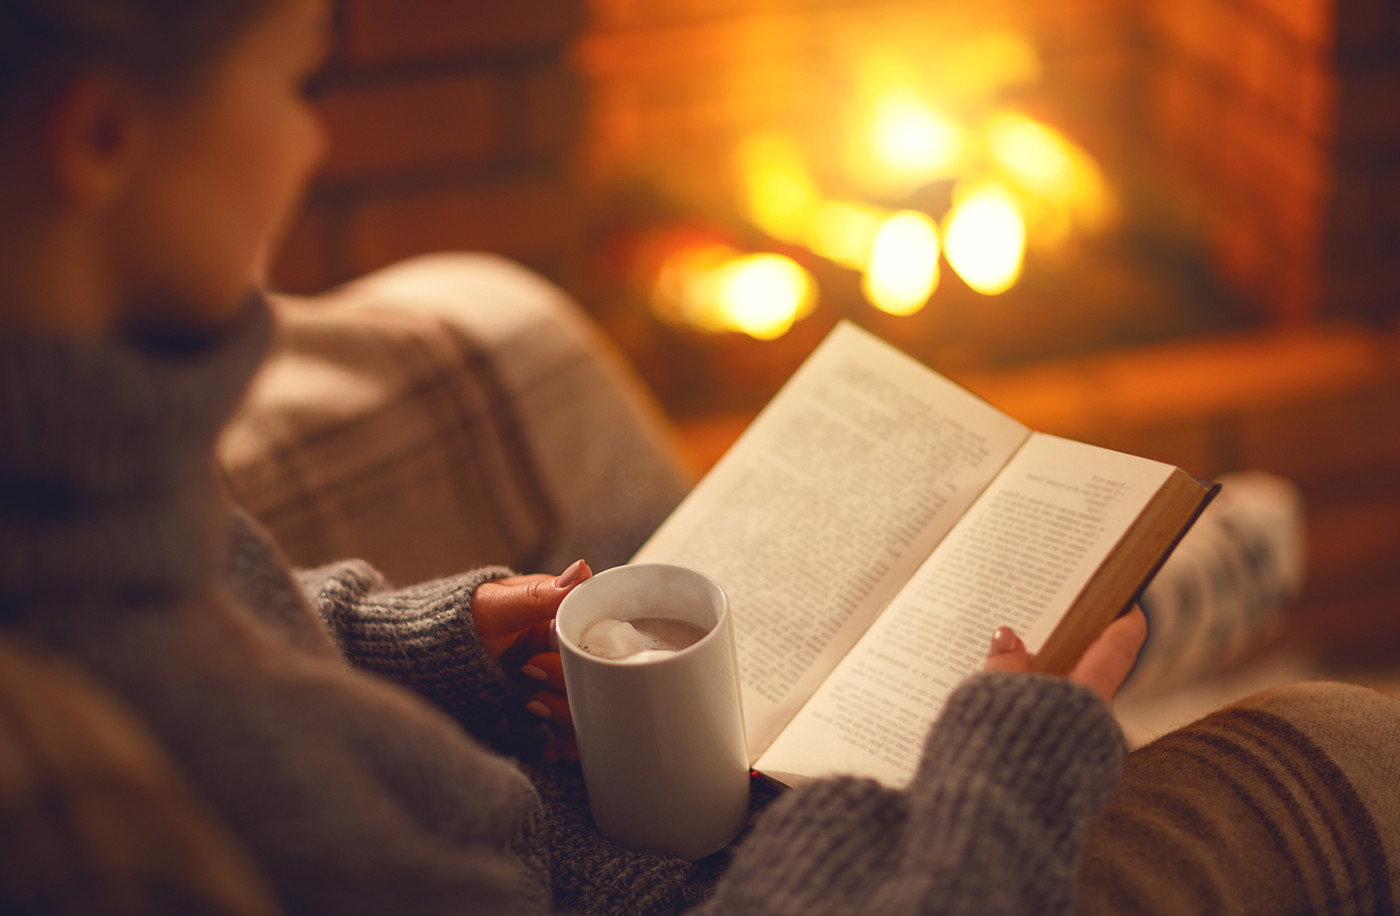 book and cup of coffee in hands of girl on  winter evening near